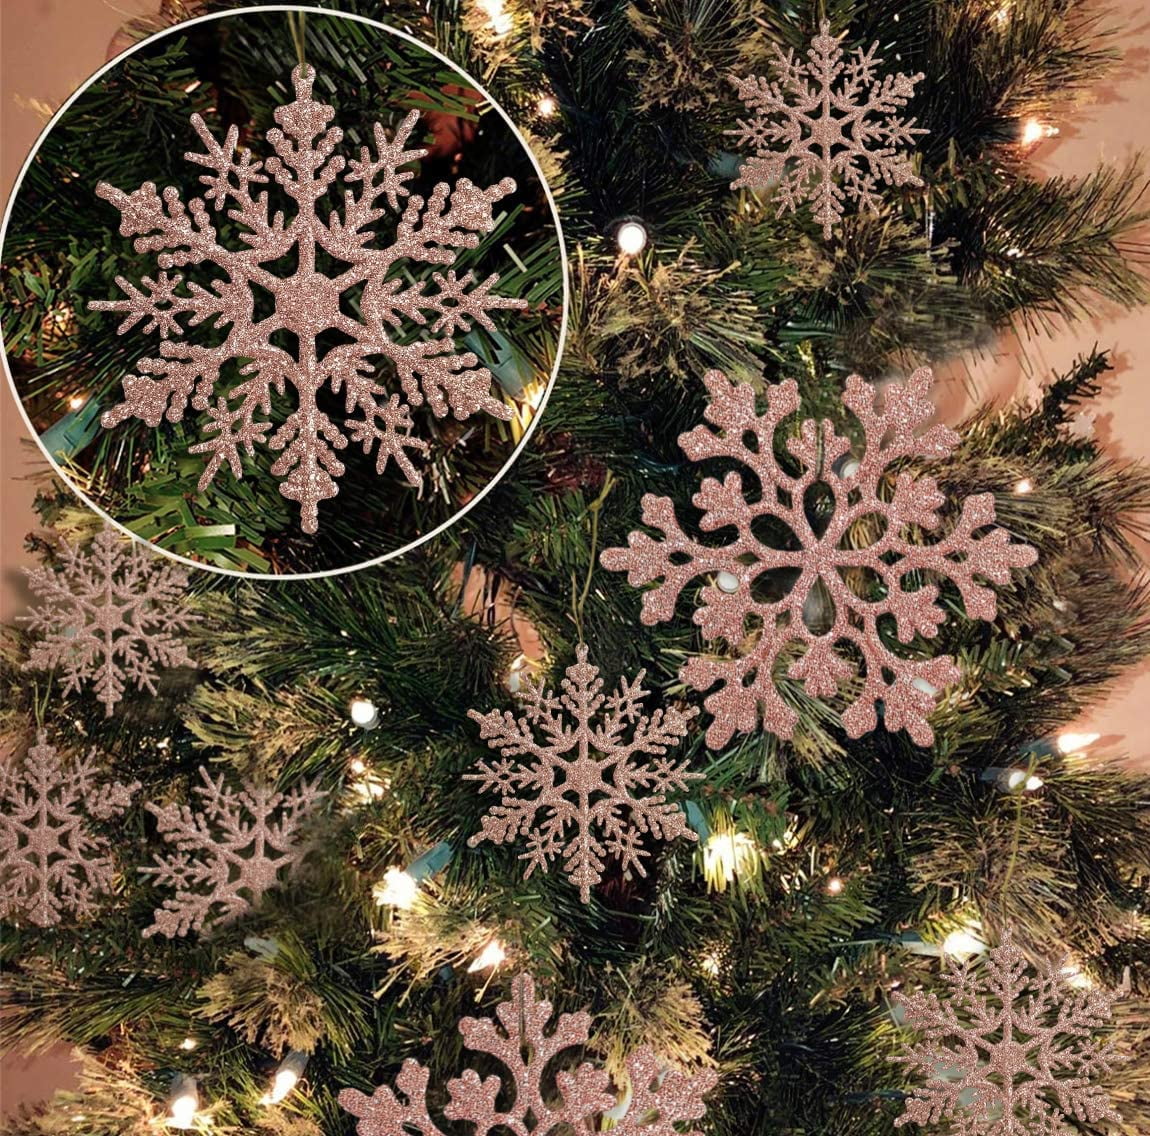 Newhomestyle 36pcs Christmas Gold Snowflake Ornaments Plastic Glitter Snow  Flakes Ornaments for Winter Christmas Tree Decorations Size Varies Craft  Snowflakes 